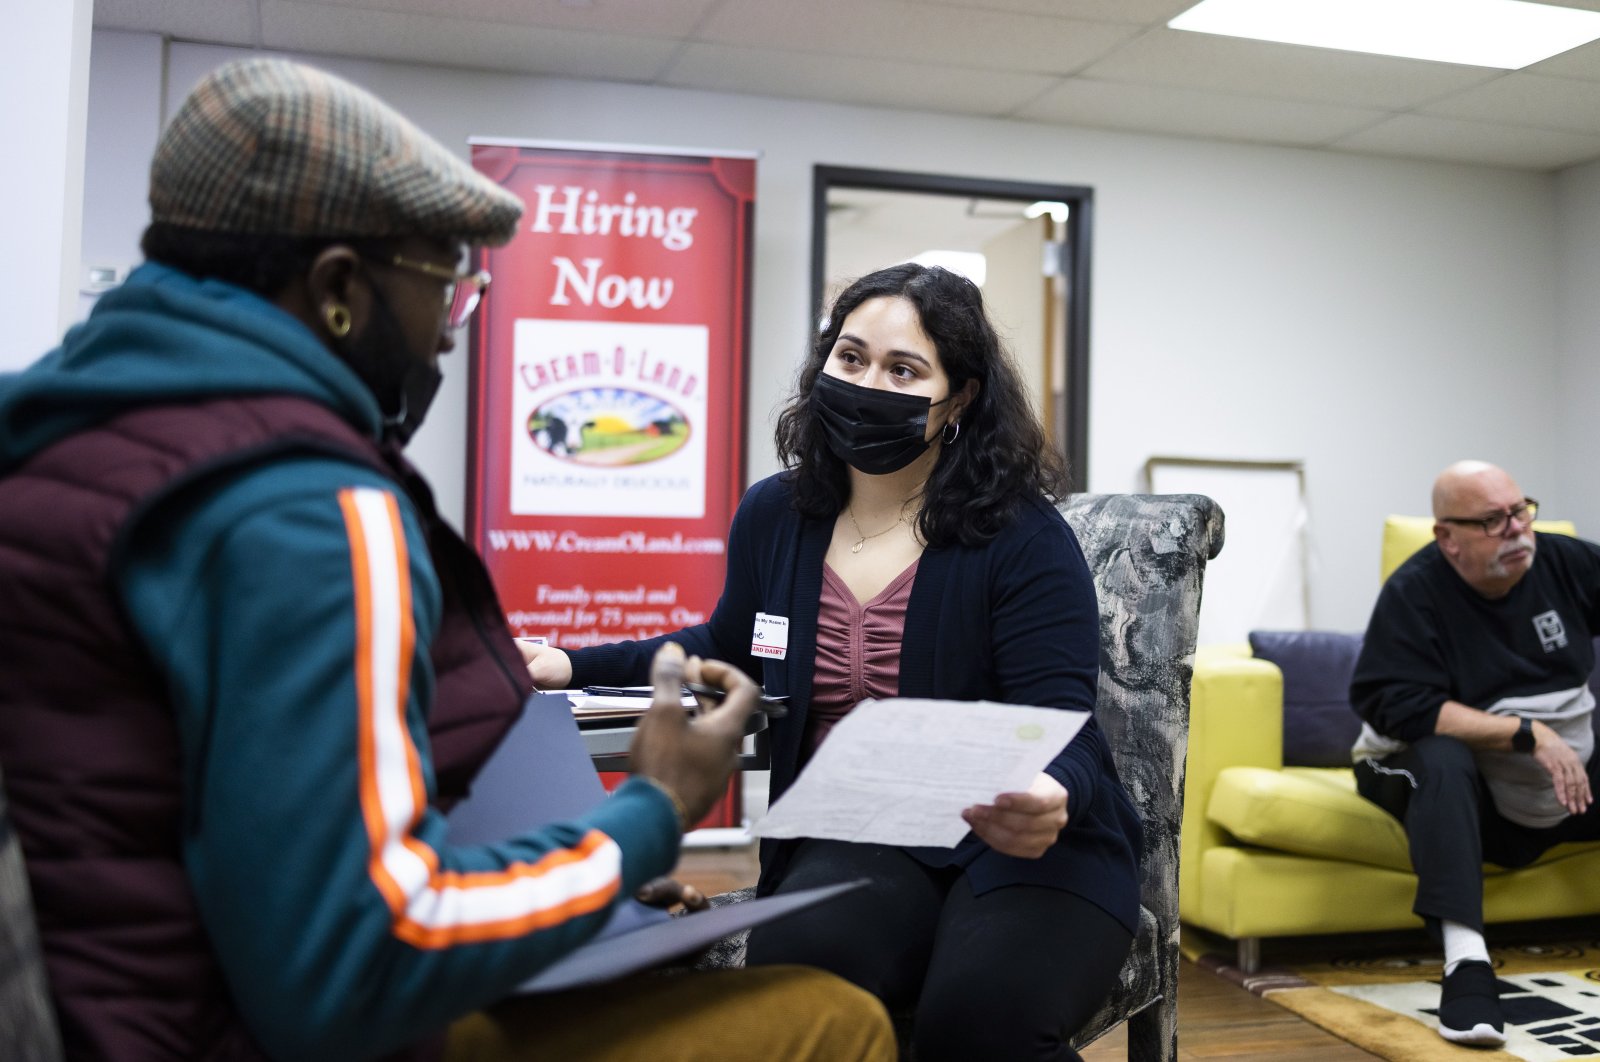 Jeannie Santamaria (C), a human resources coordinator for the Cream-O-Land dairy, talks with a man (L) filling out a job application during a job fair for truck drivers and warehouse workers at the company’s warehouse in Jersey City, New Jersey, U.S., Dec. 3, 2021. (EPA Photo)